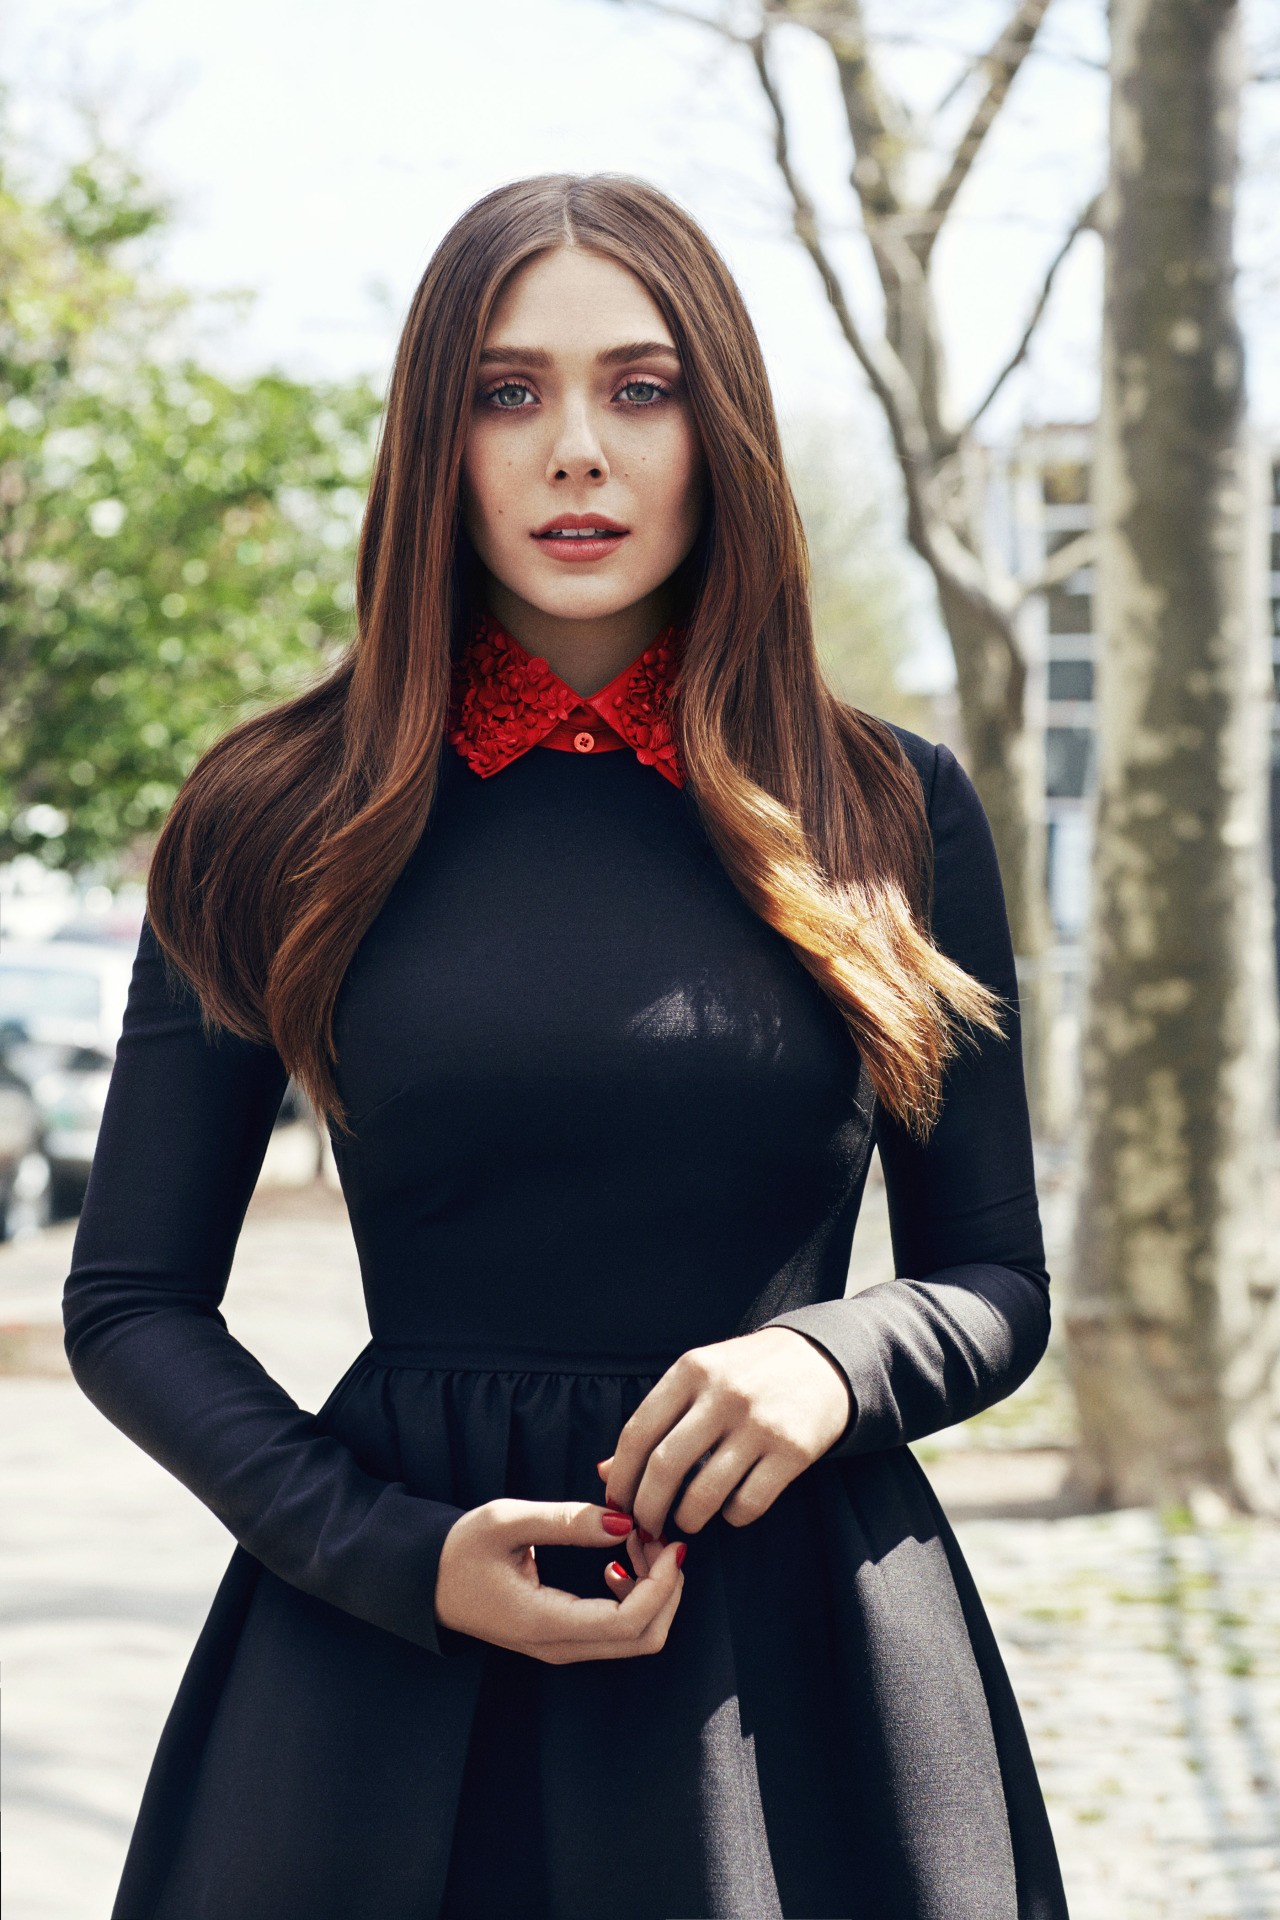 People 1280x1920 Elizabeth Olsen  women dress long hair celebrity actress red nails painted nails makeup brunette women outdoors urban red lipstick black dress black clothing looking at viewer